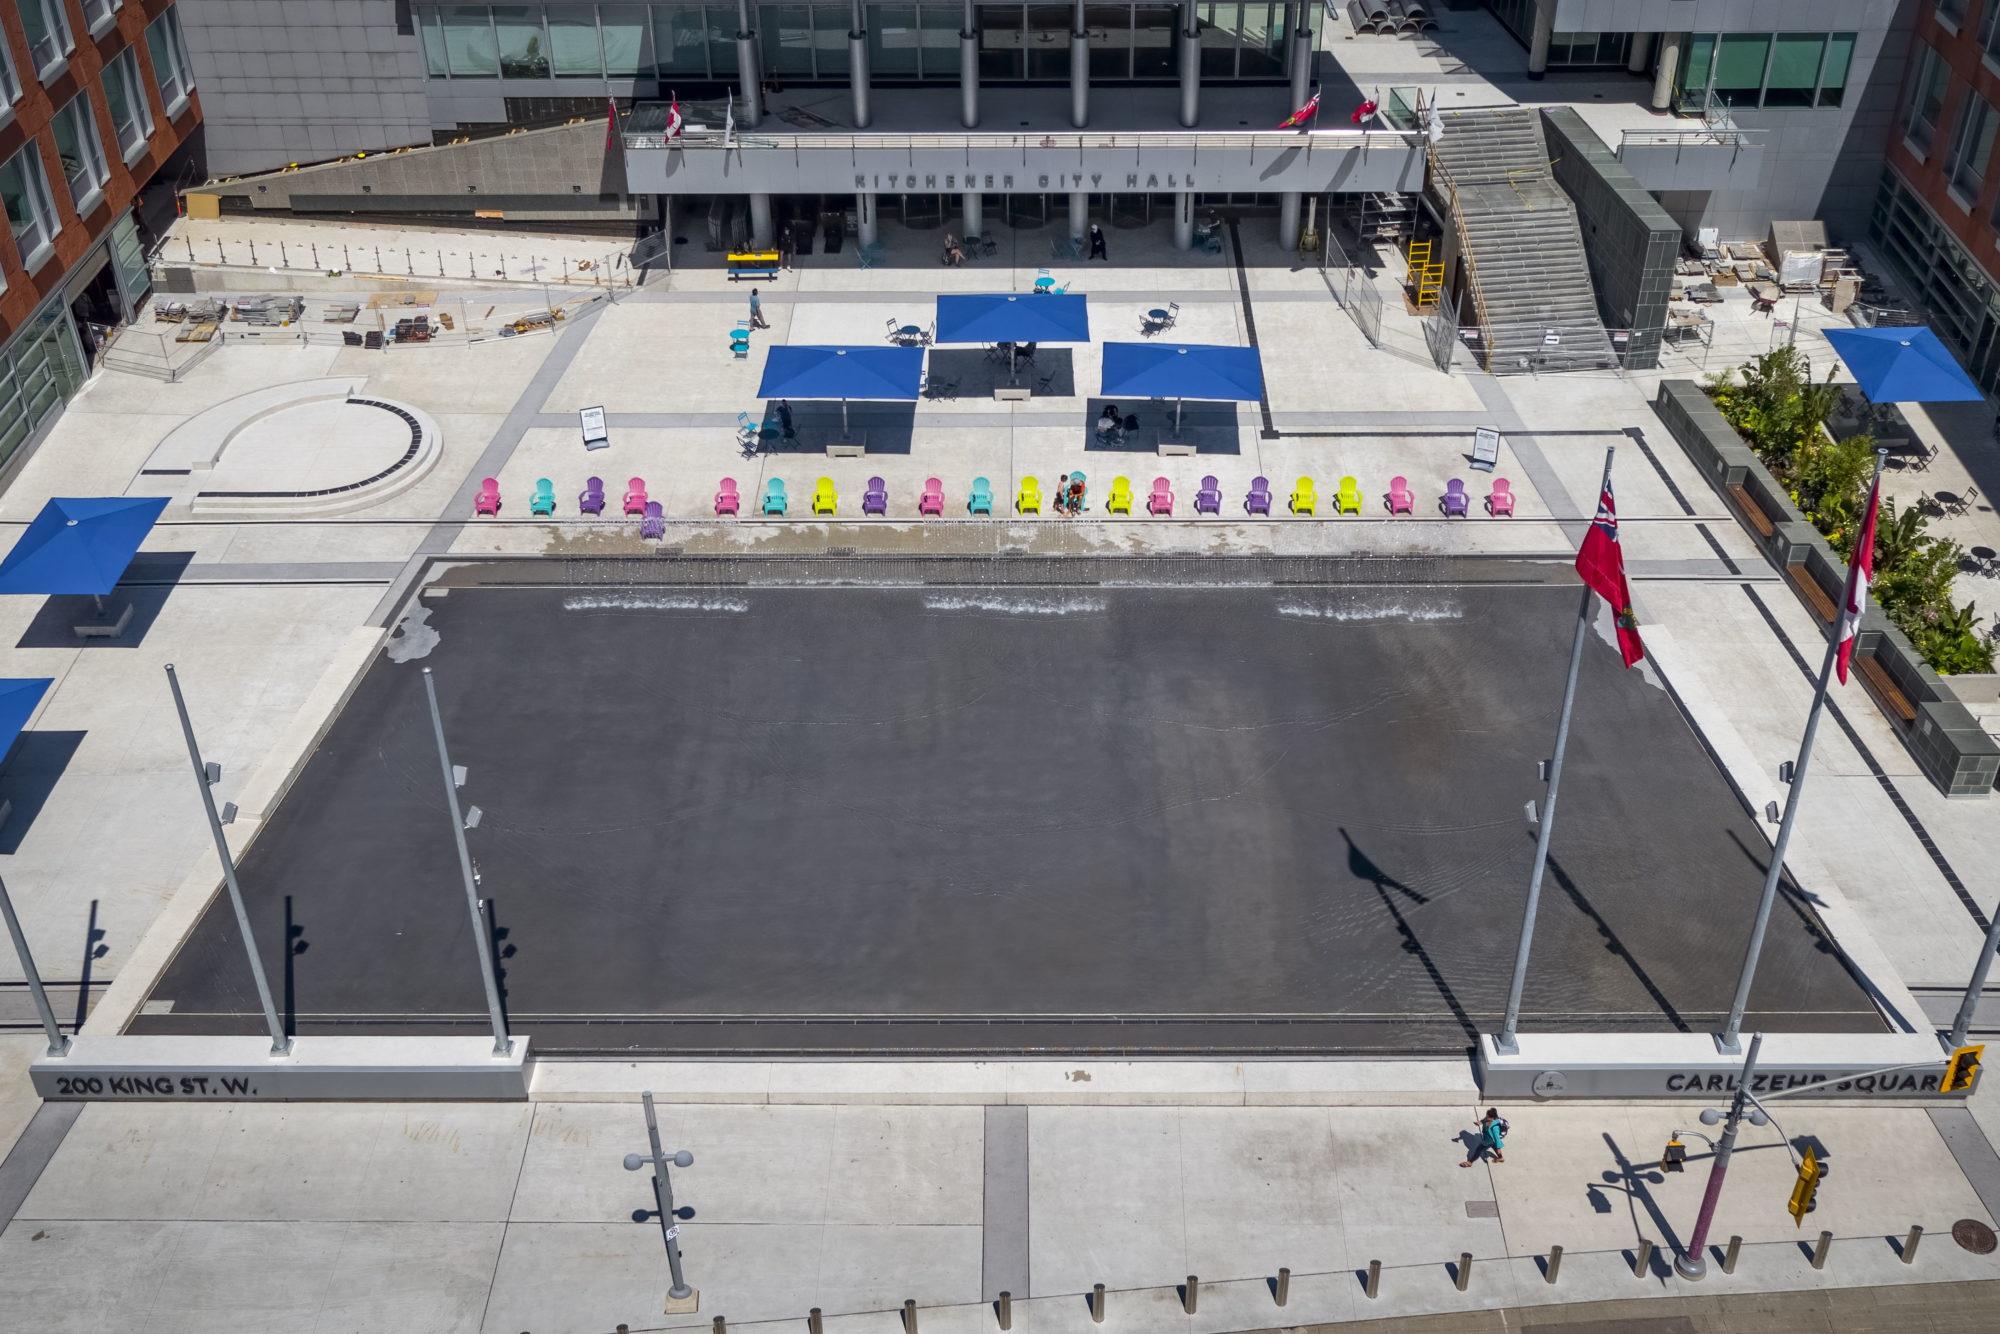 Aerial view of Kitchener City Hall Outdoor spaces with a water feature in the centre that will be a skating rink in the winter months. The rink is surrounded by City Hall buildings.